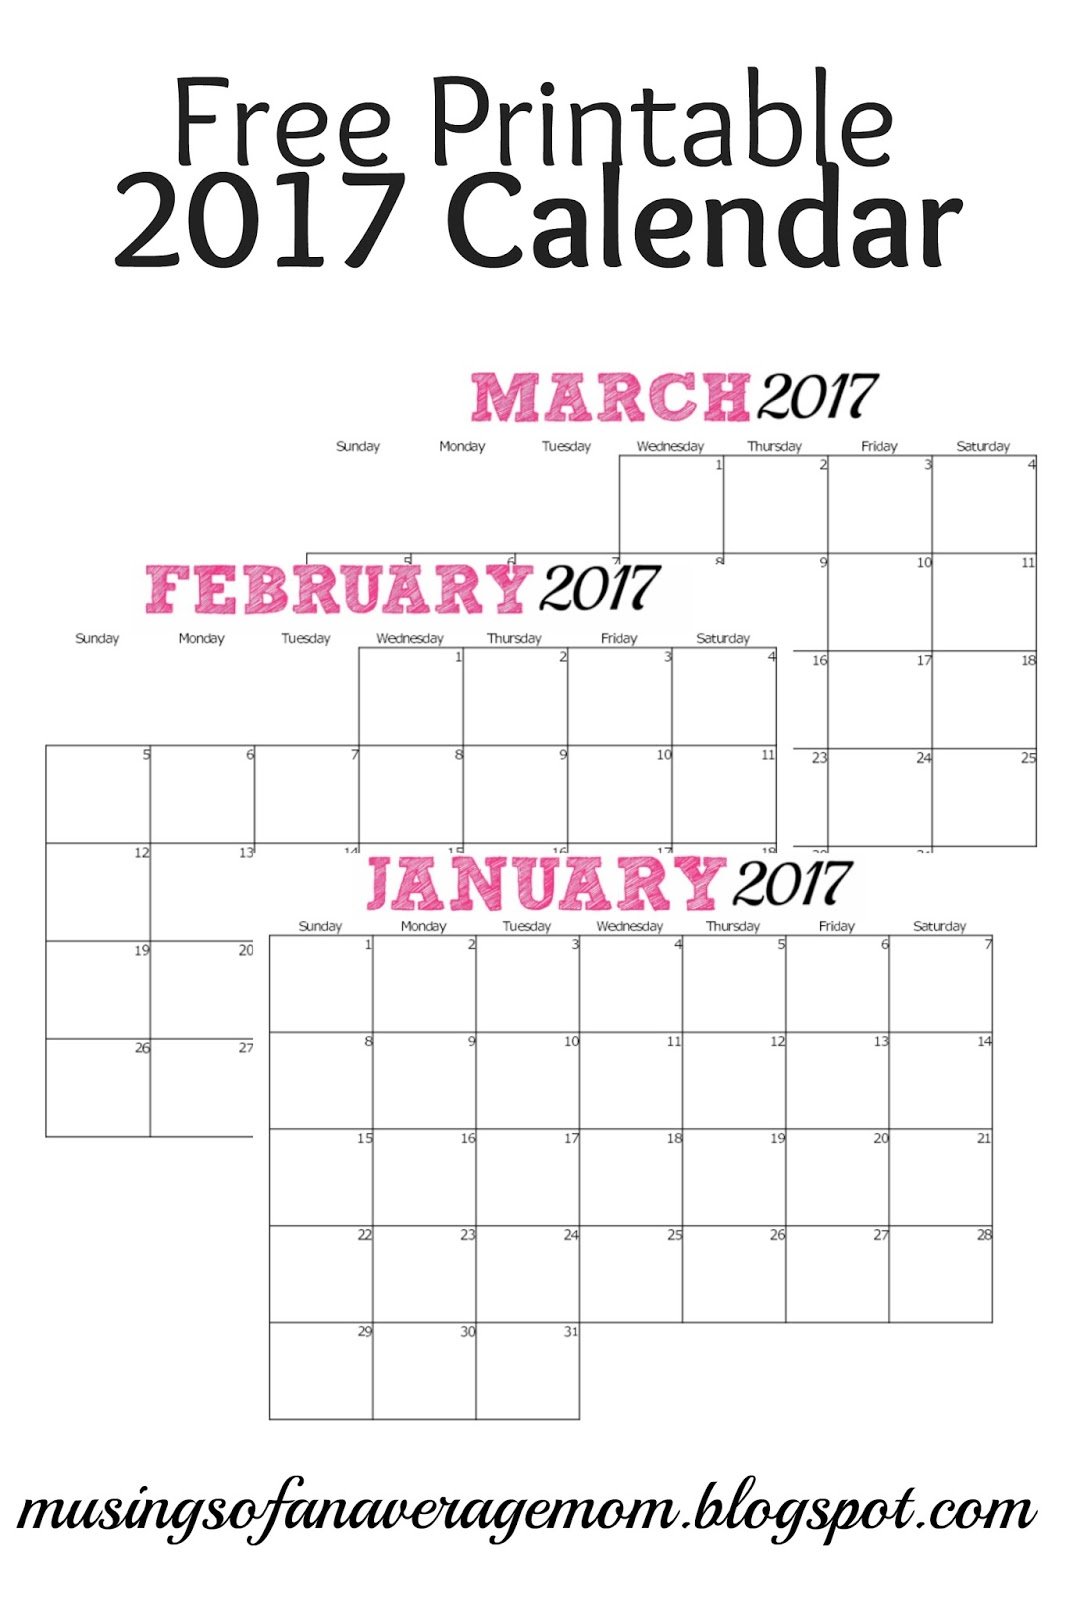 Musings Of An Average Mom: 2017 Monthly Calendars - Free 2017 Printable